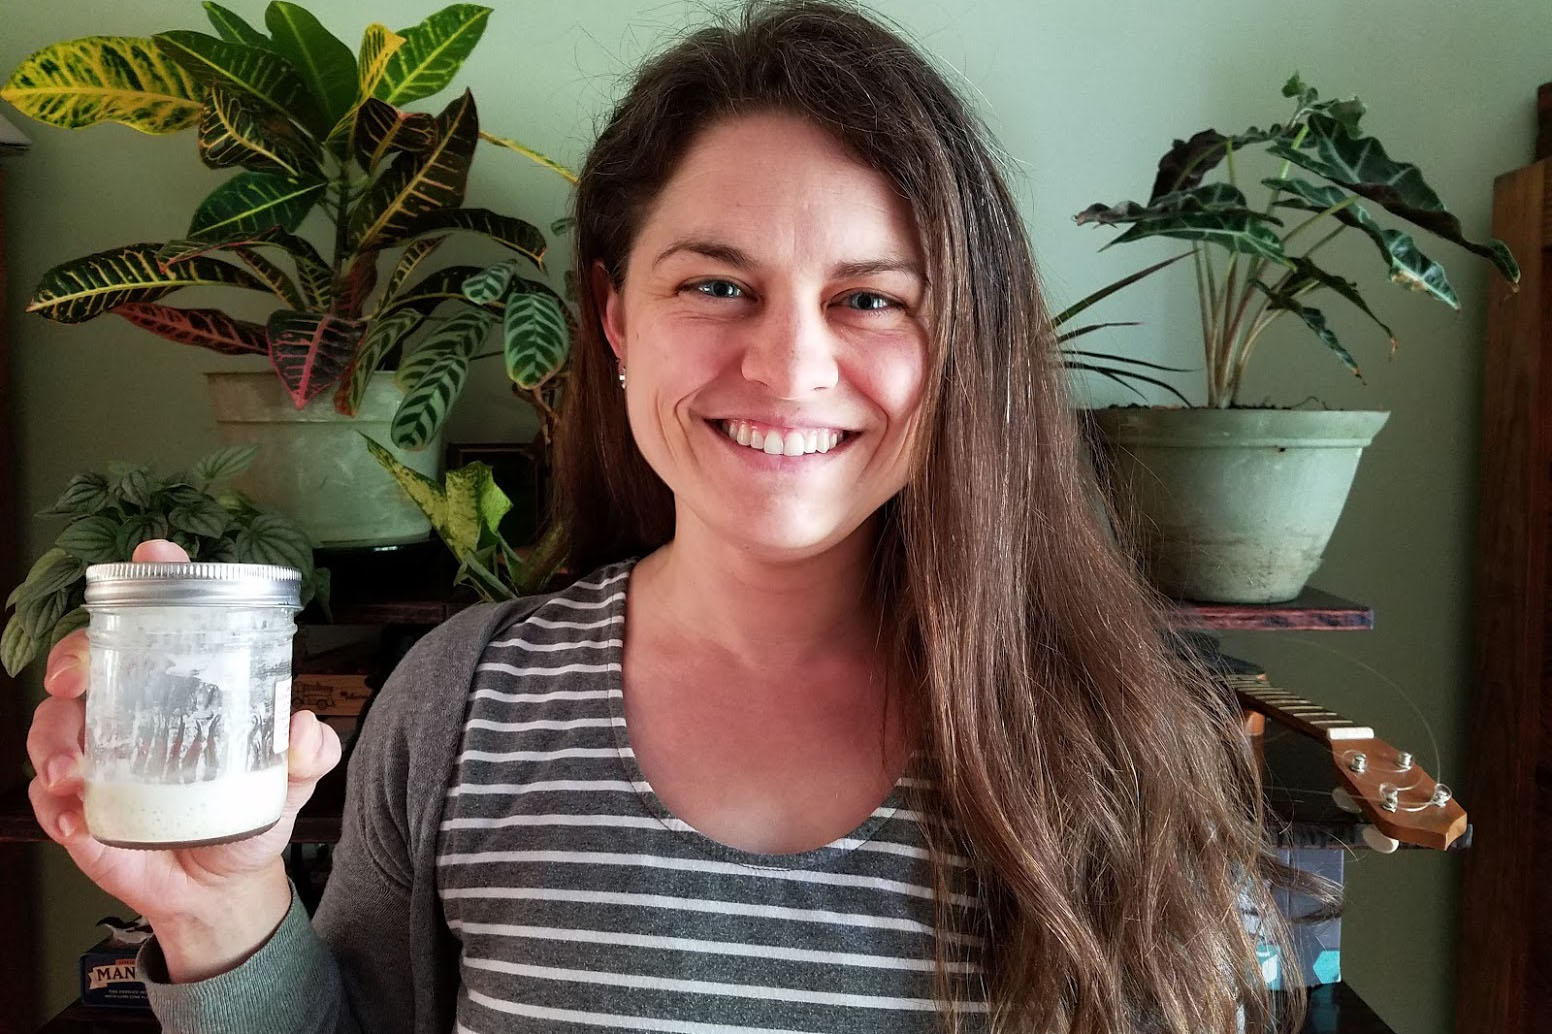 Erin McKenney smiles at the camera and holds up a jar of sourdough starter, a green wall and houseplants in the background.  